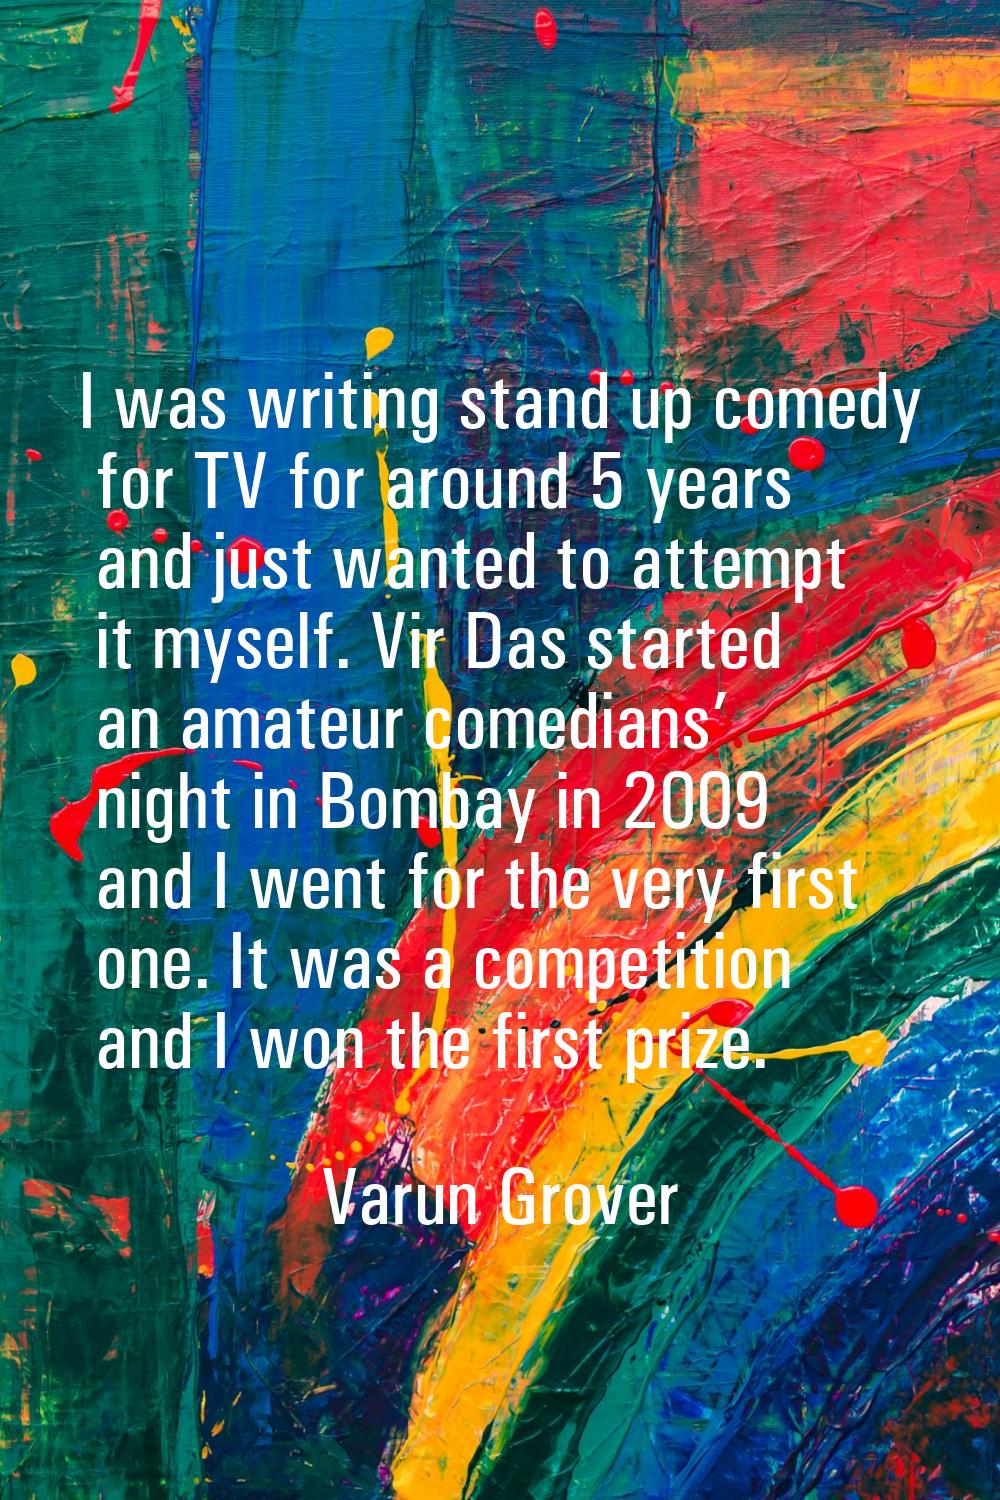 I was writing stand up comedy for TV for around 5 years and just wanted to attempt it myself. Vir D